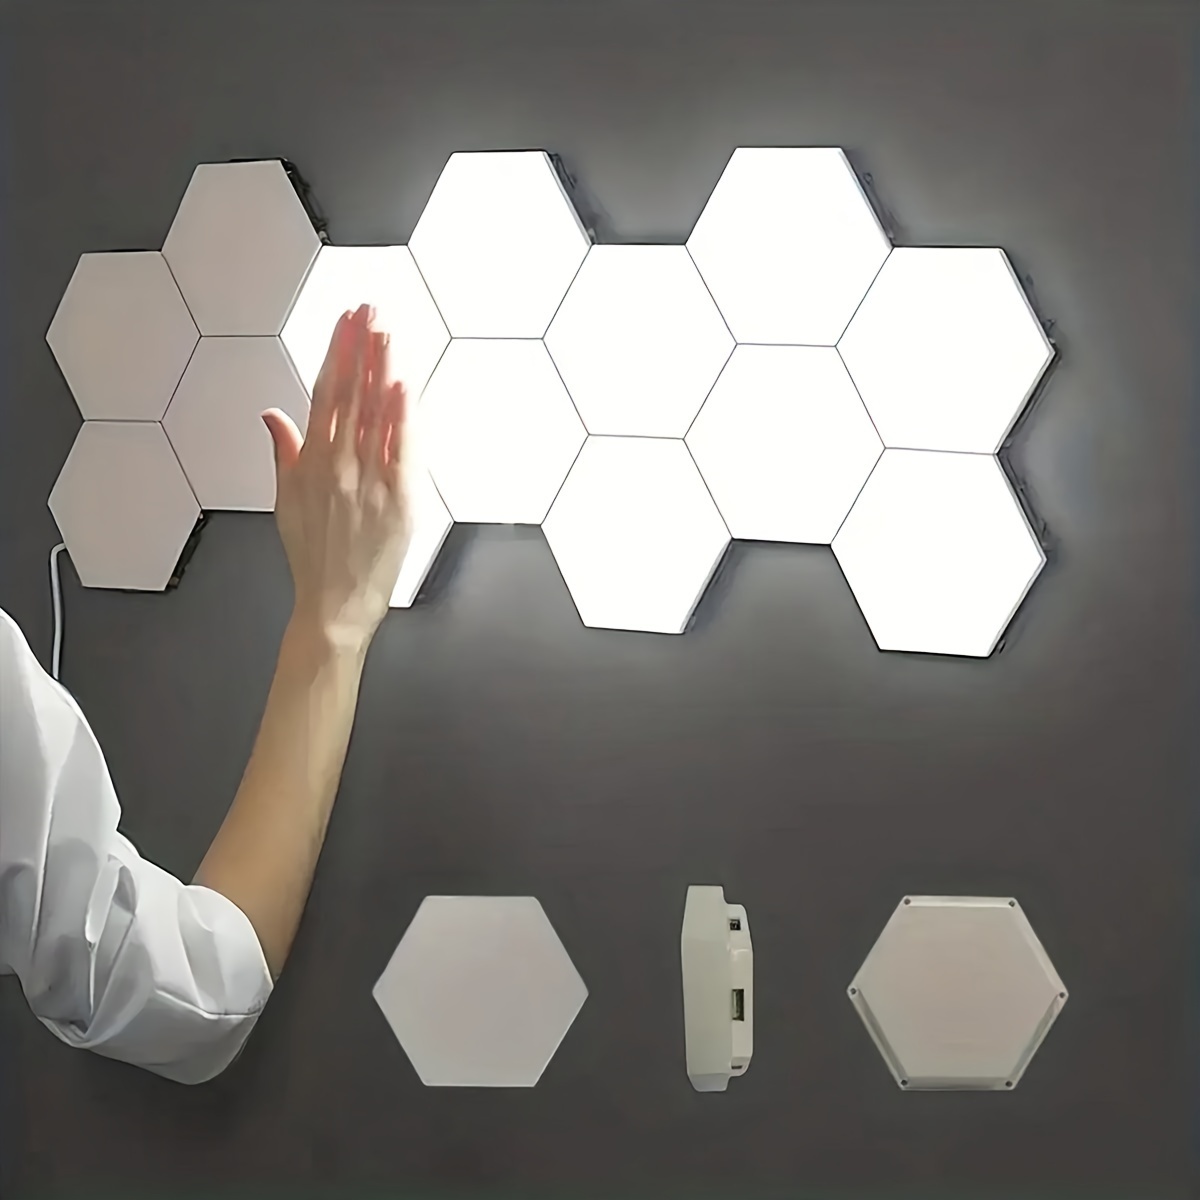 

6pcs Touch Sensing Control Can Splice Hexagonal Led Wall Light Neutral Night Light Suitable For Creative Decoration Room Decoration Easy To Use And Energy Saving